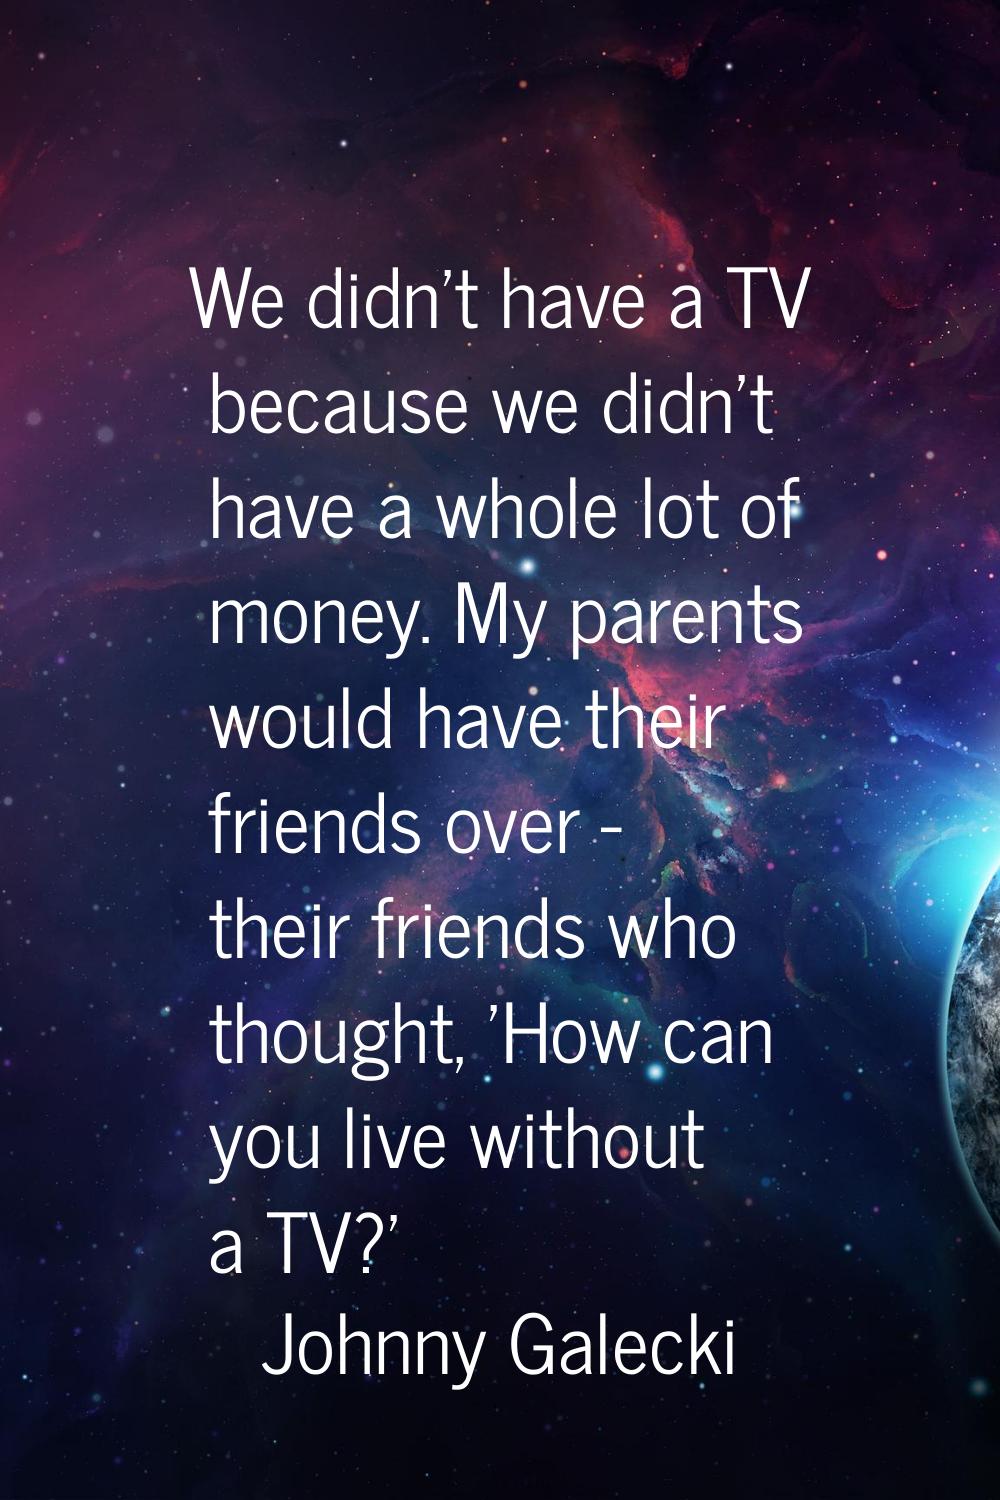 We didn't have a TV because we didn't have a whole lot of money. My parents would have their friend